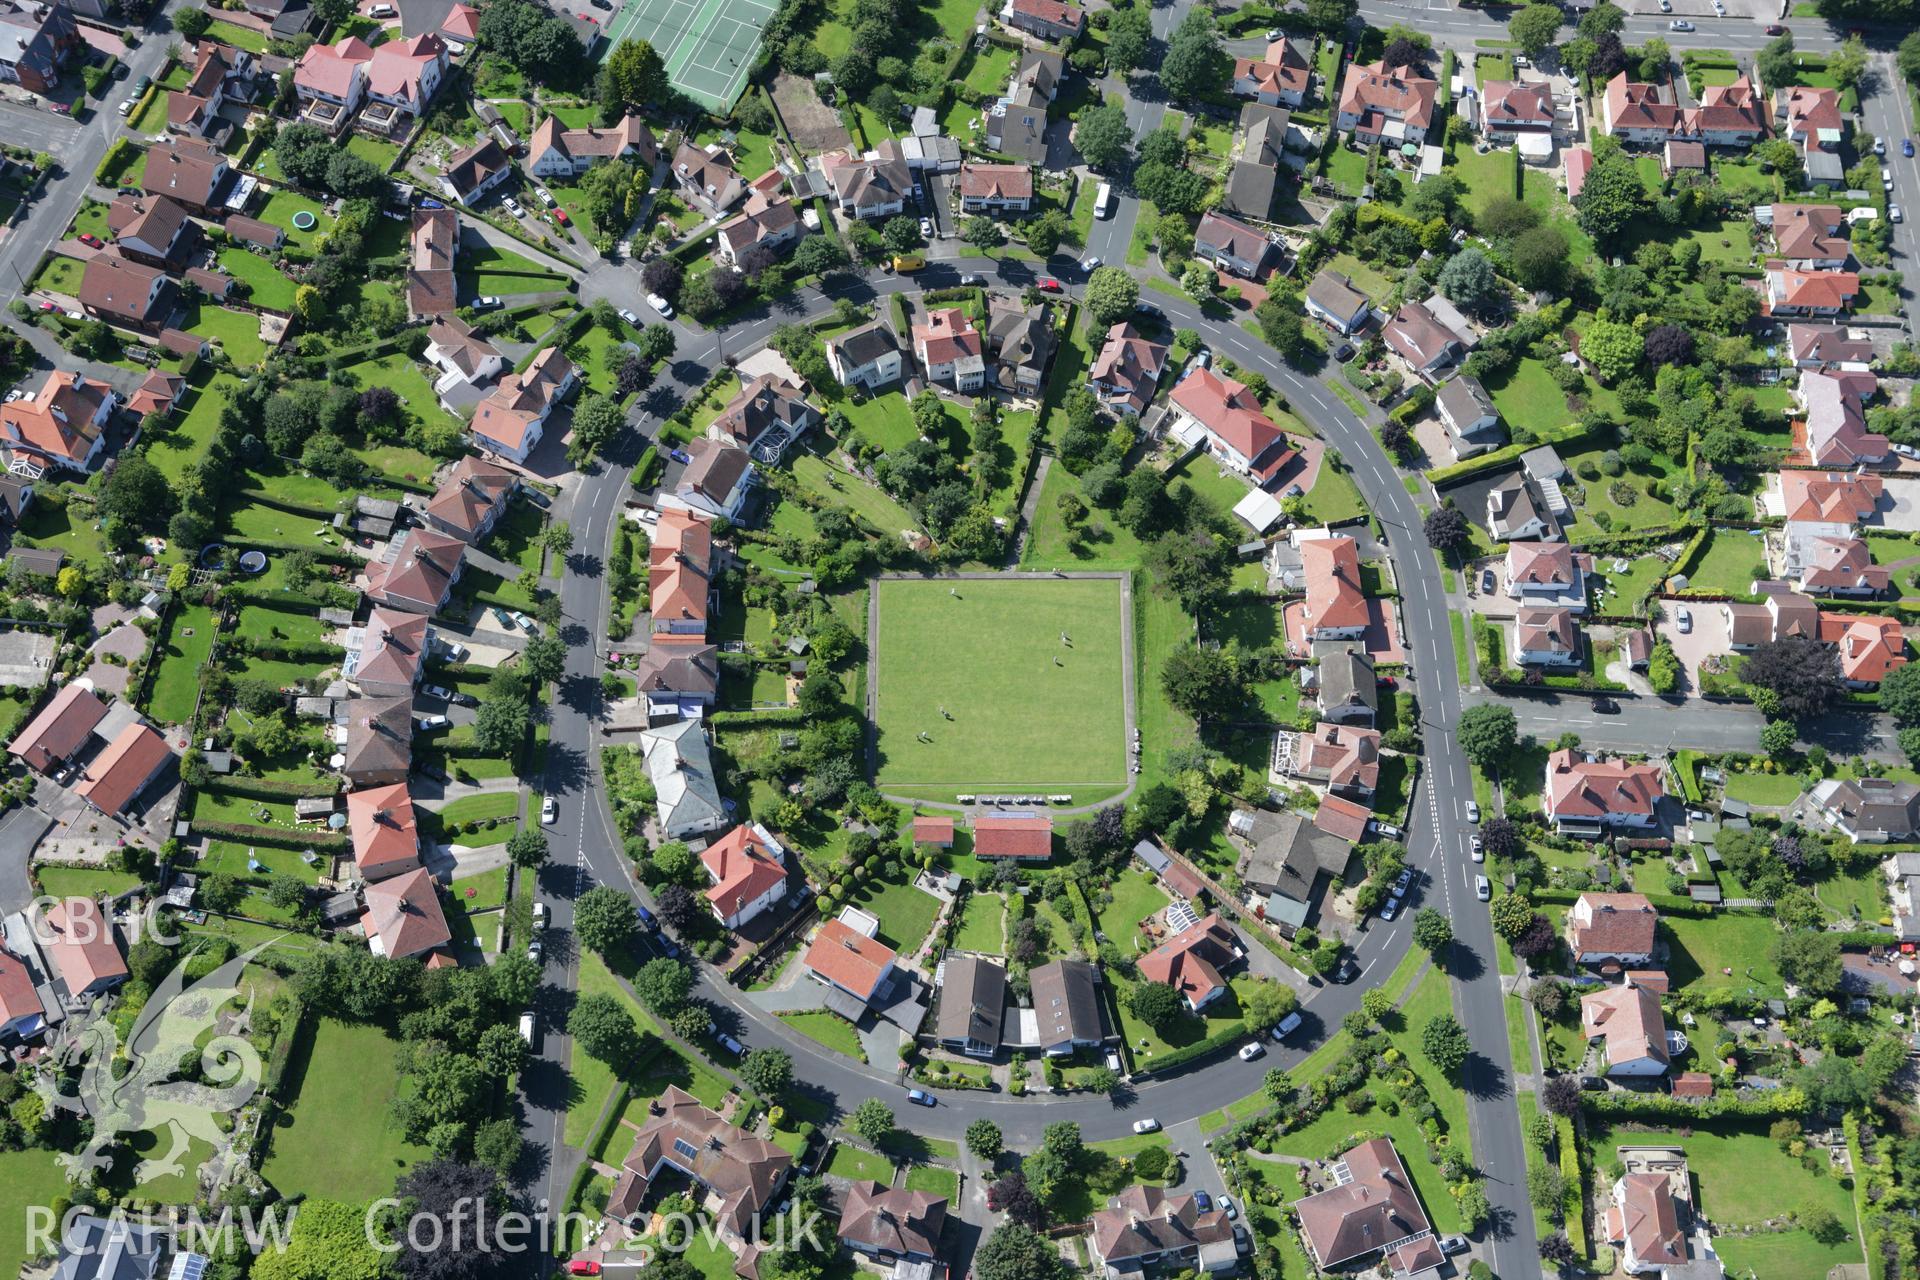 RCAHMW colour oblique aerial photograph of Prestatyn showing a housing estate and bowling green. Taken on 31 July 2007 by Toby Driver